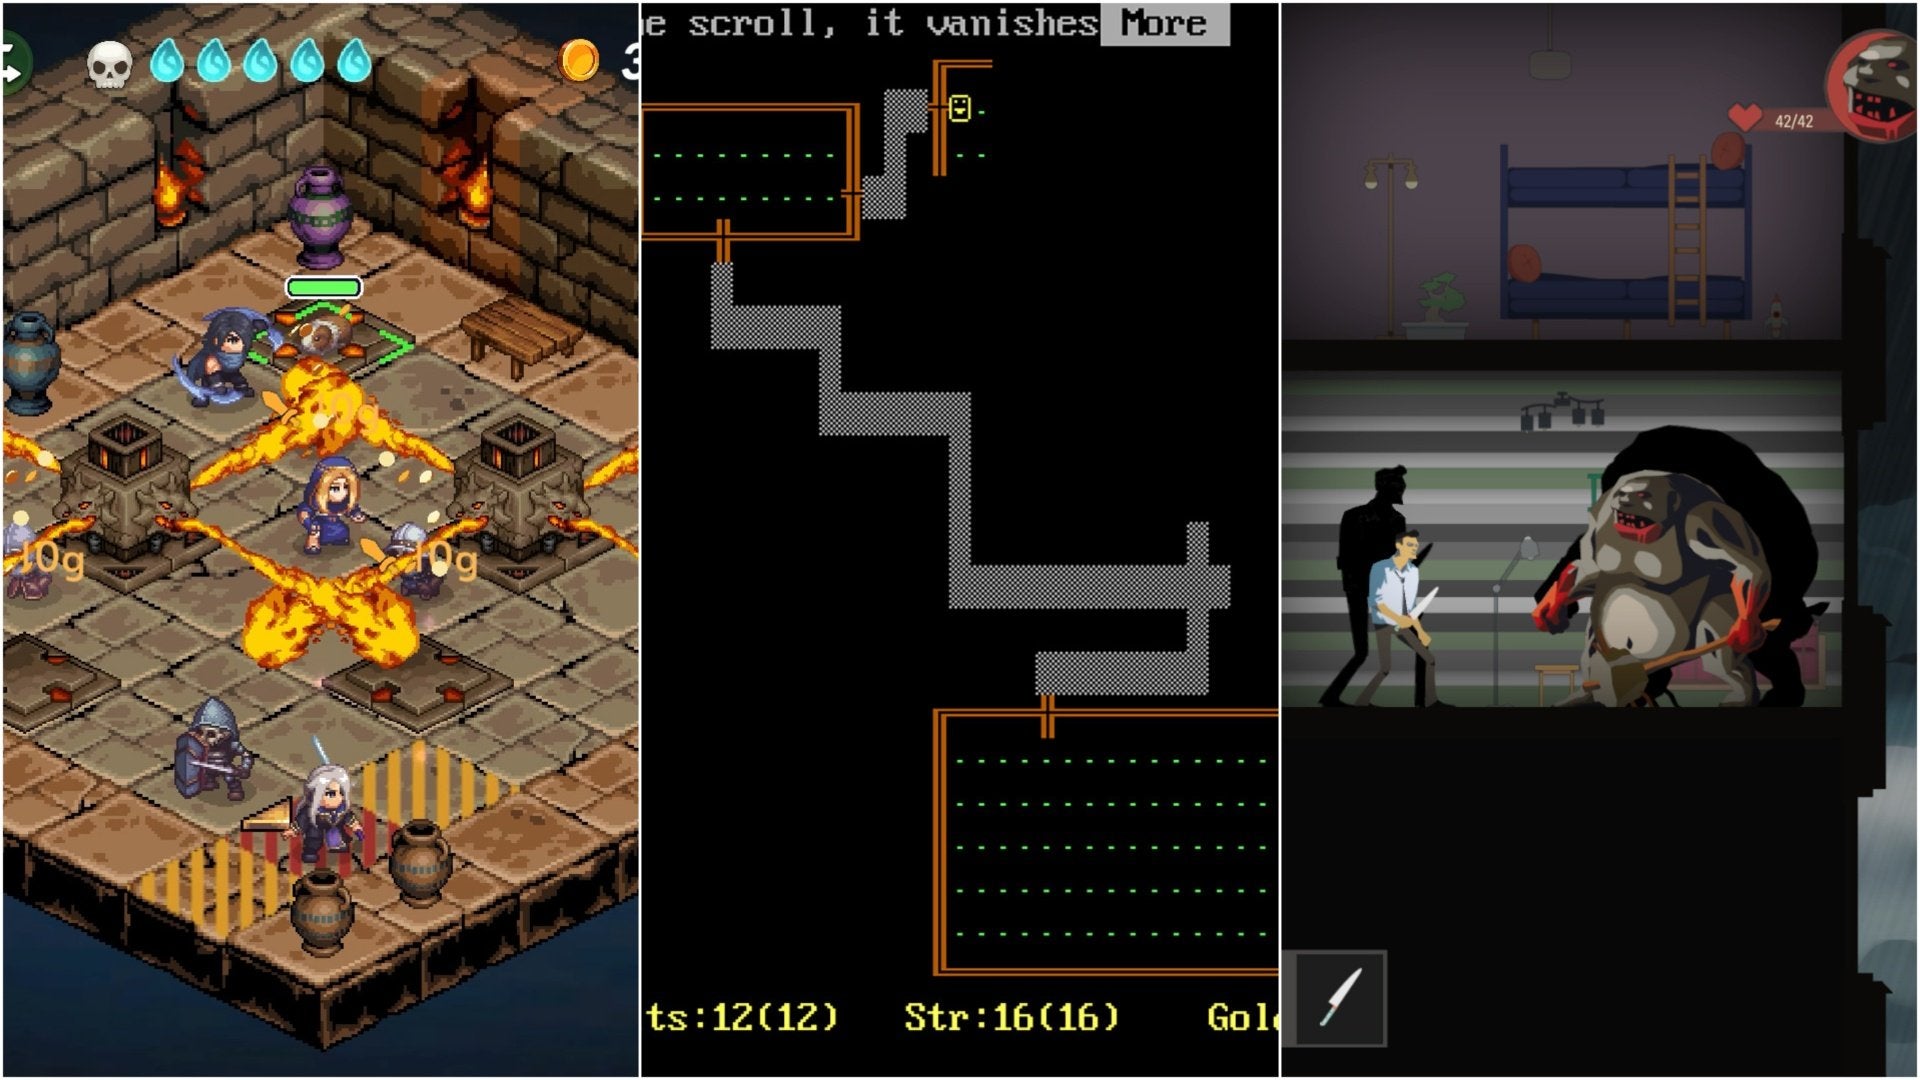 On the left is a player surrounded by fire traps in Tyrant's Blessing, in the center is a player descending a level in Rogue, and on the right is a player fighting a large zombie in SKYHILL.